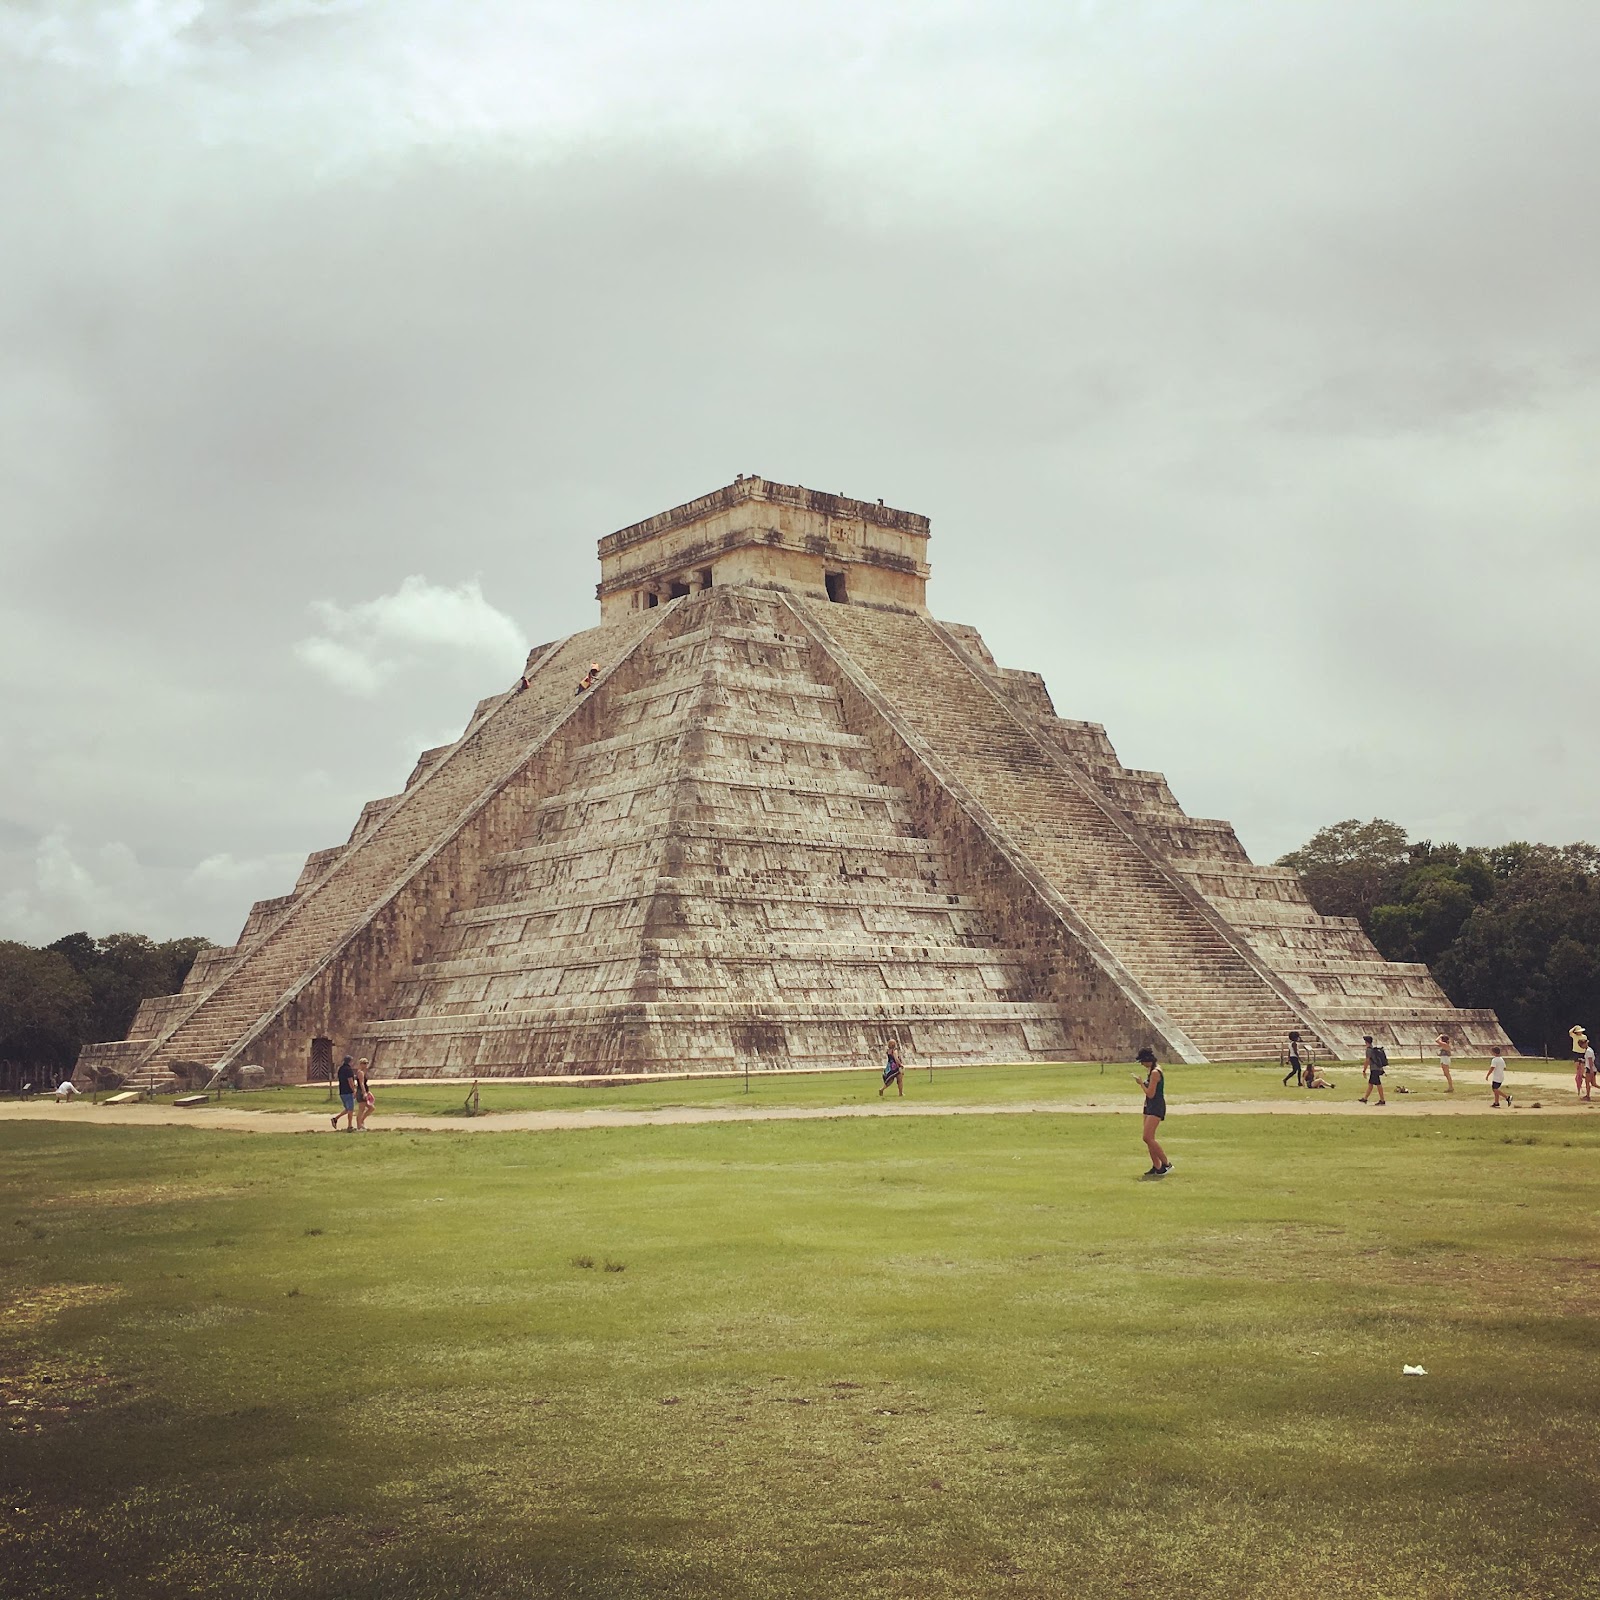 a pyramid in a grassy field with Chichen Itza in the background